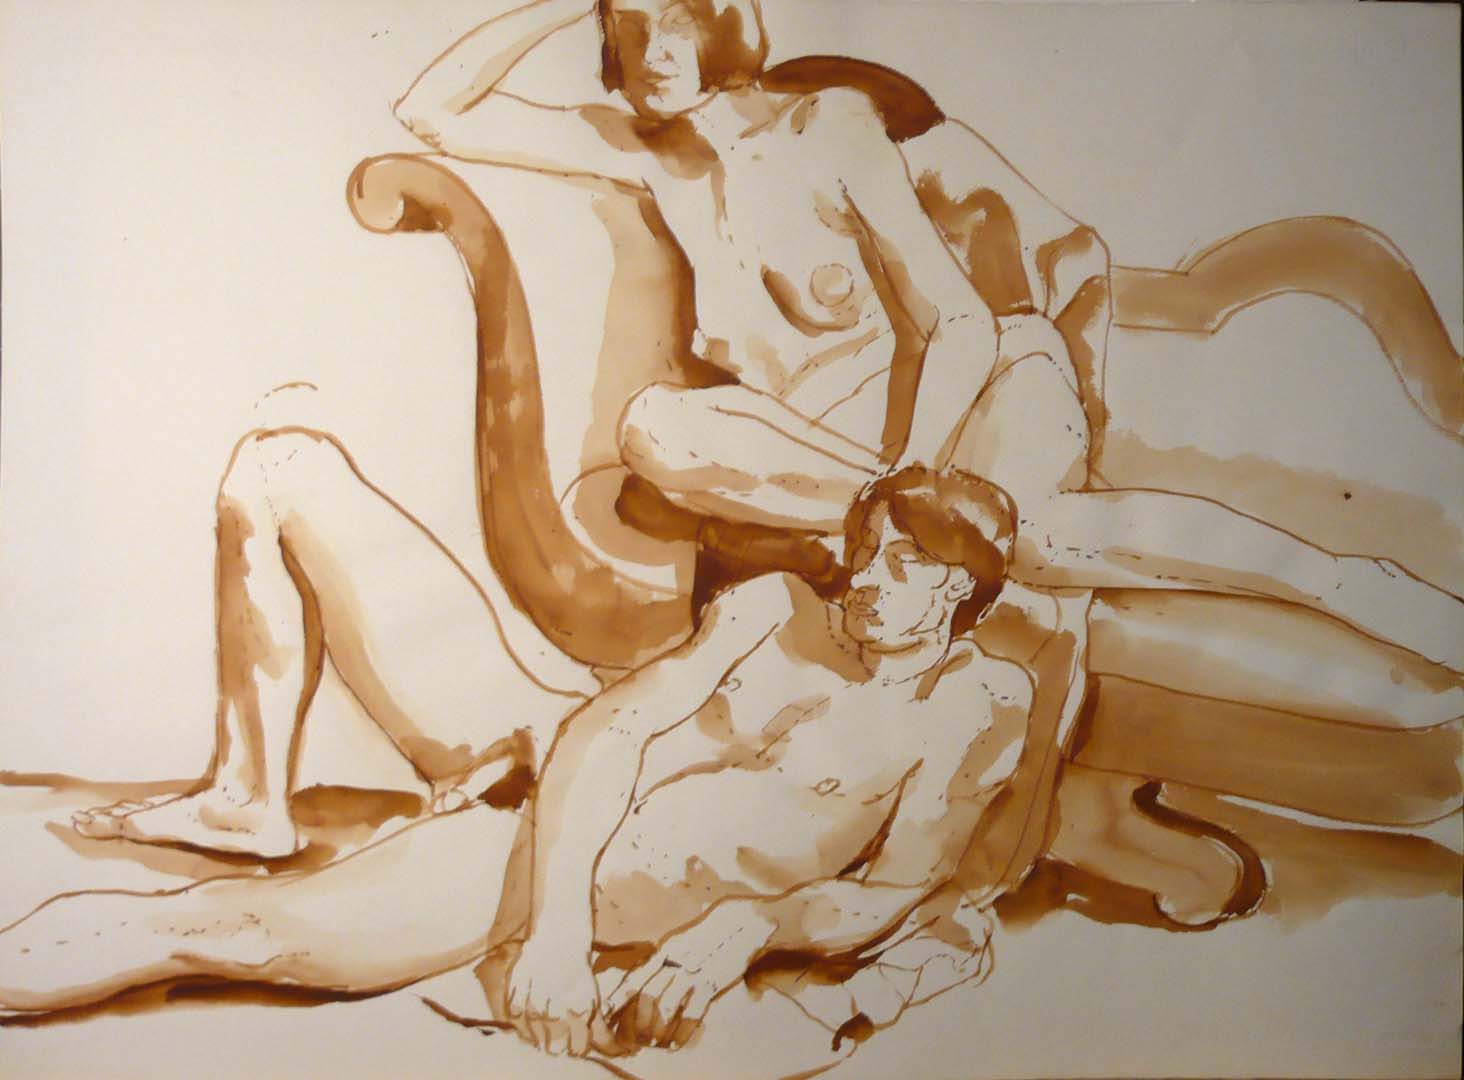 Male and Female Models with Sofa Sepia 22 x 29.875